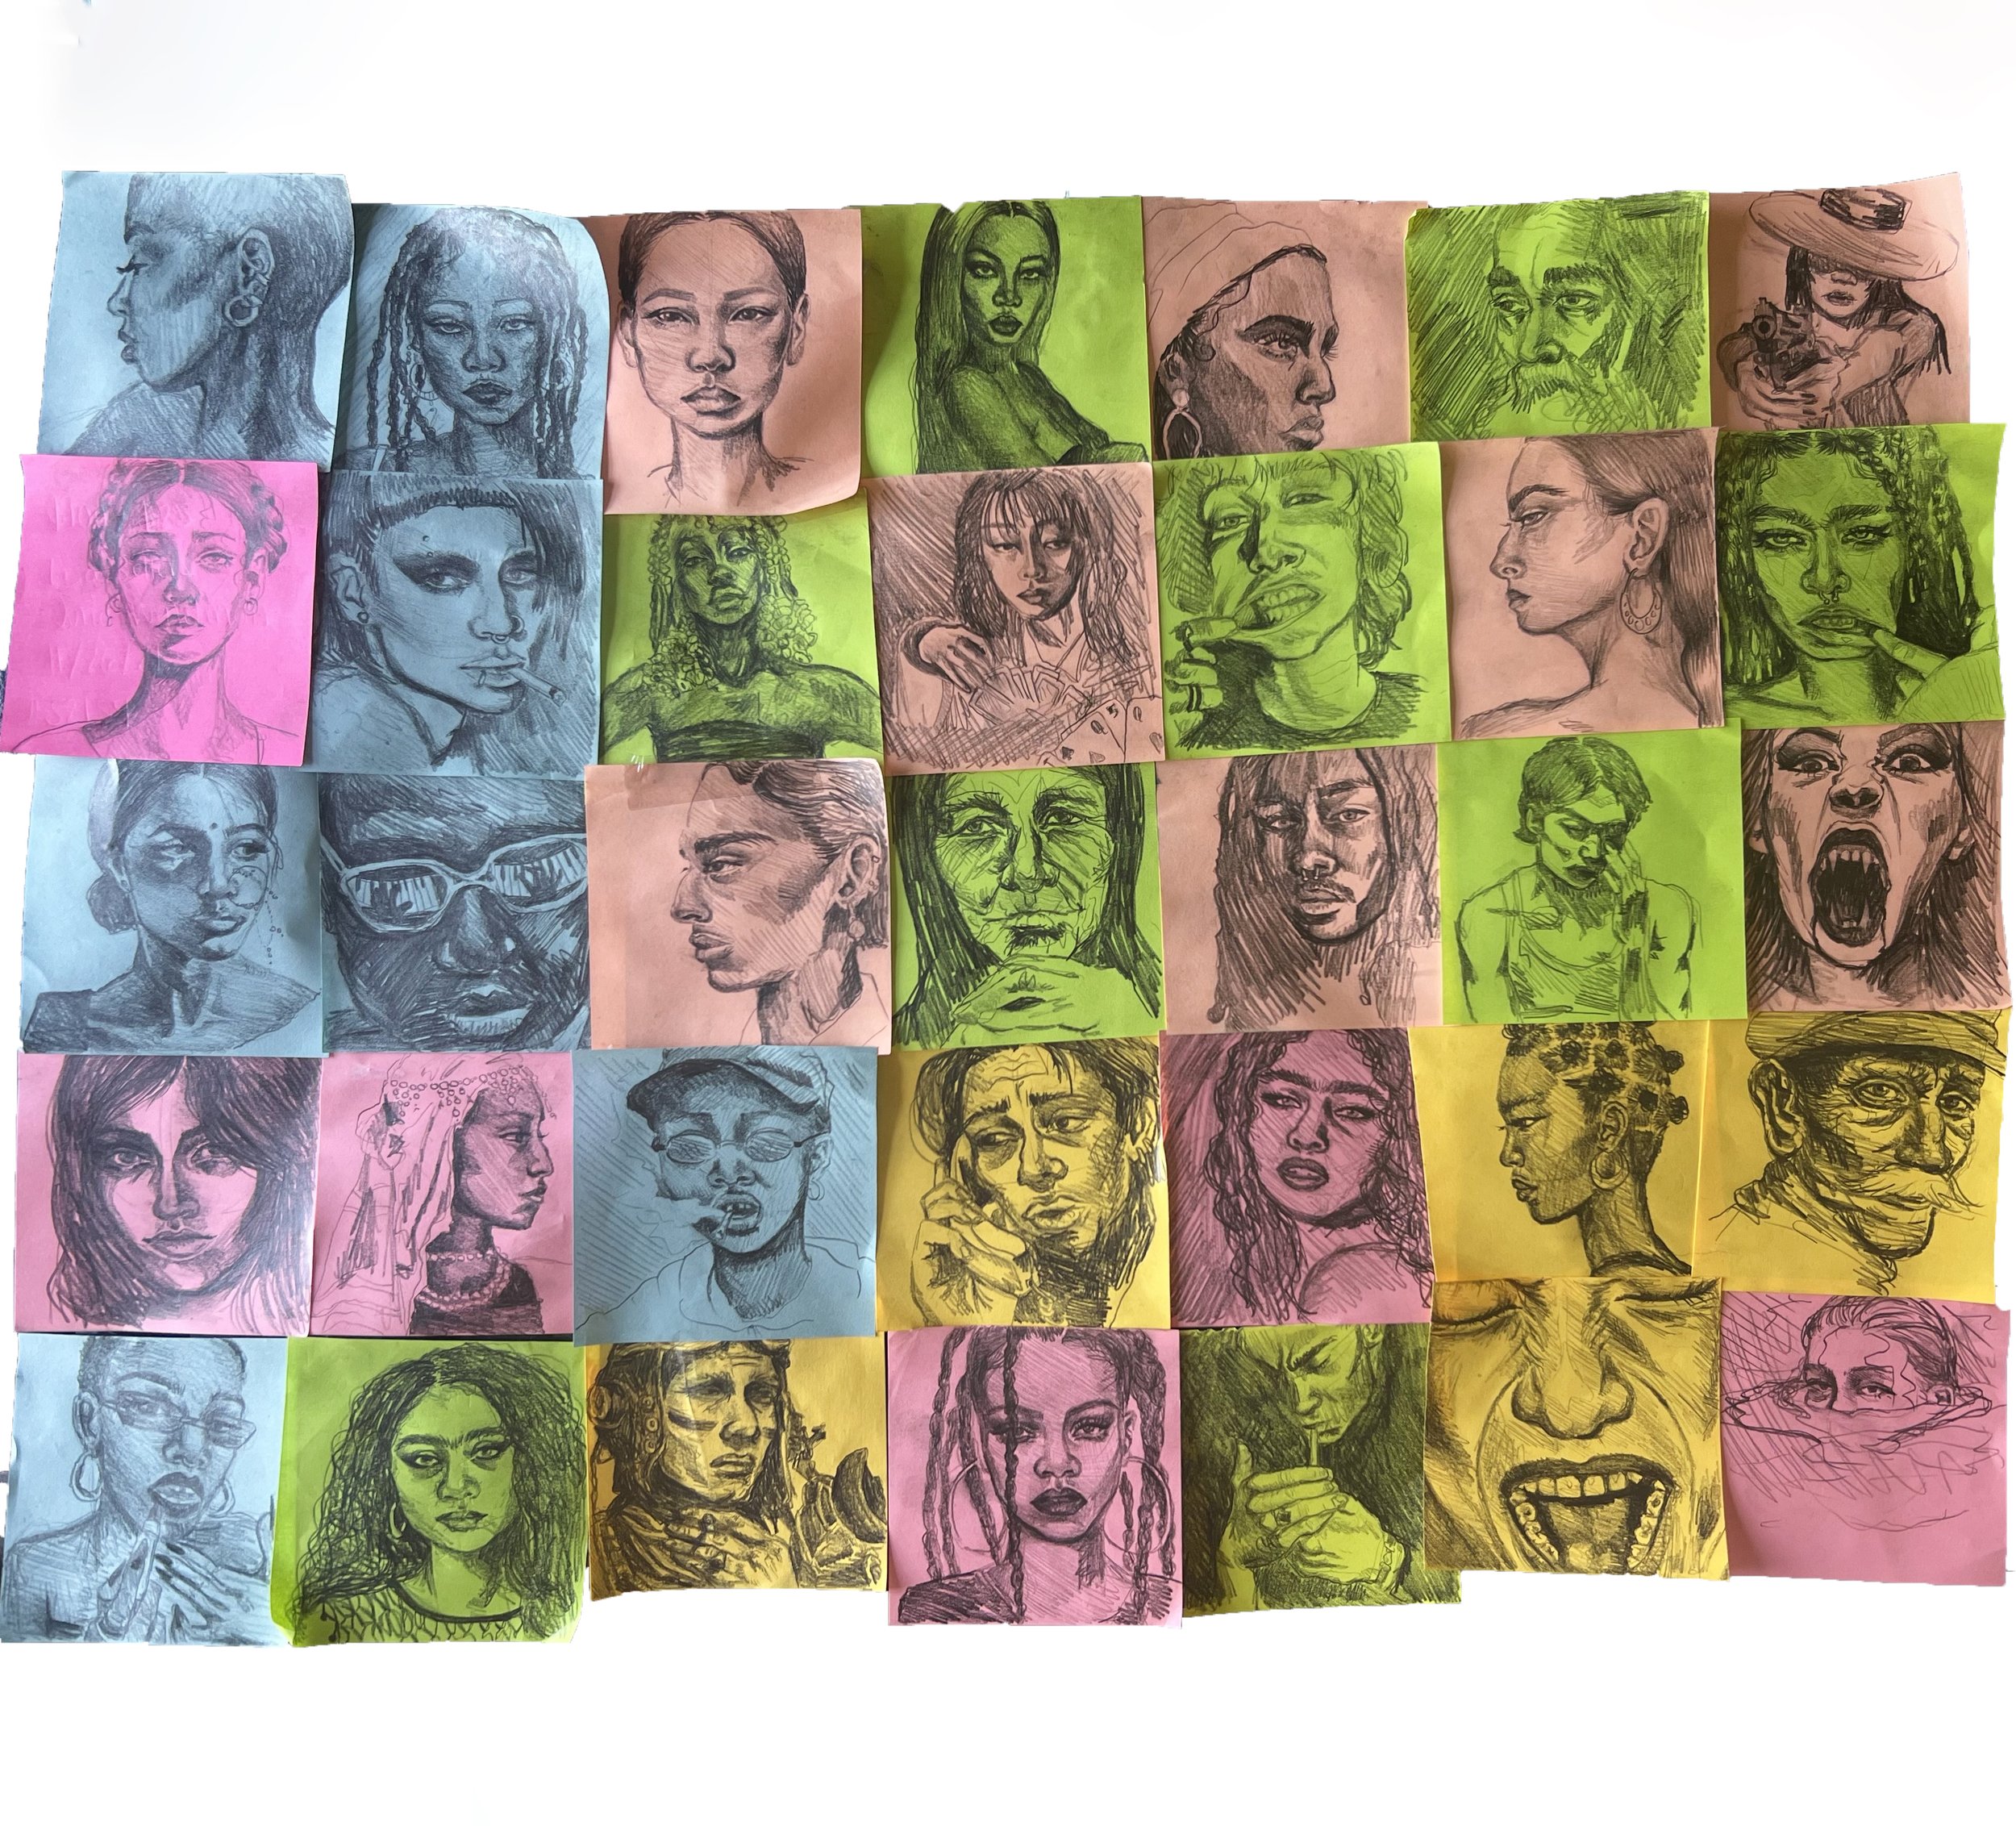 post-it portraits, graphite on post-it notes